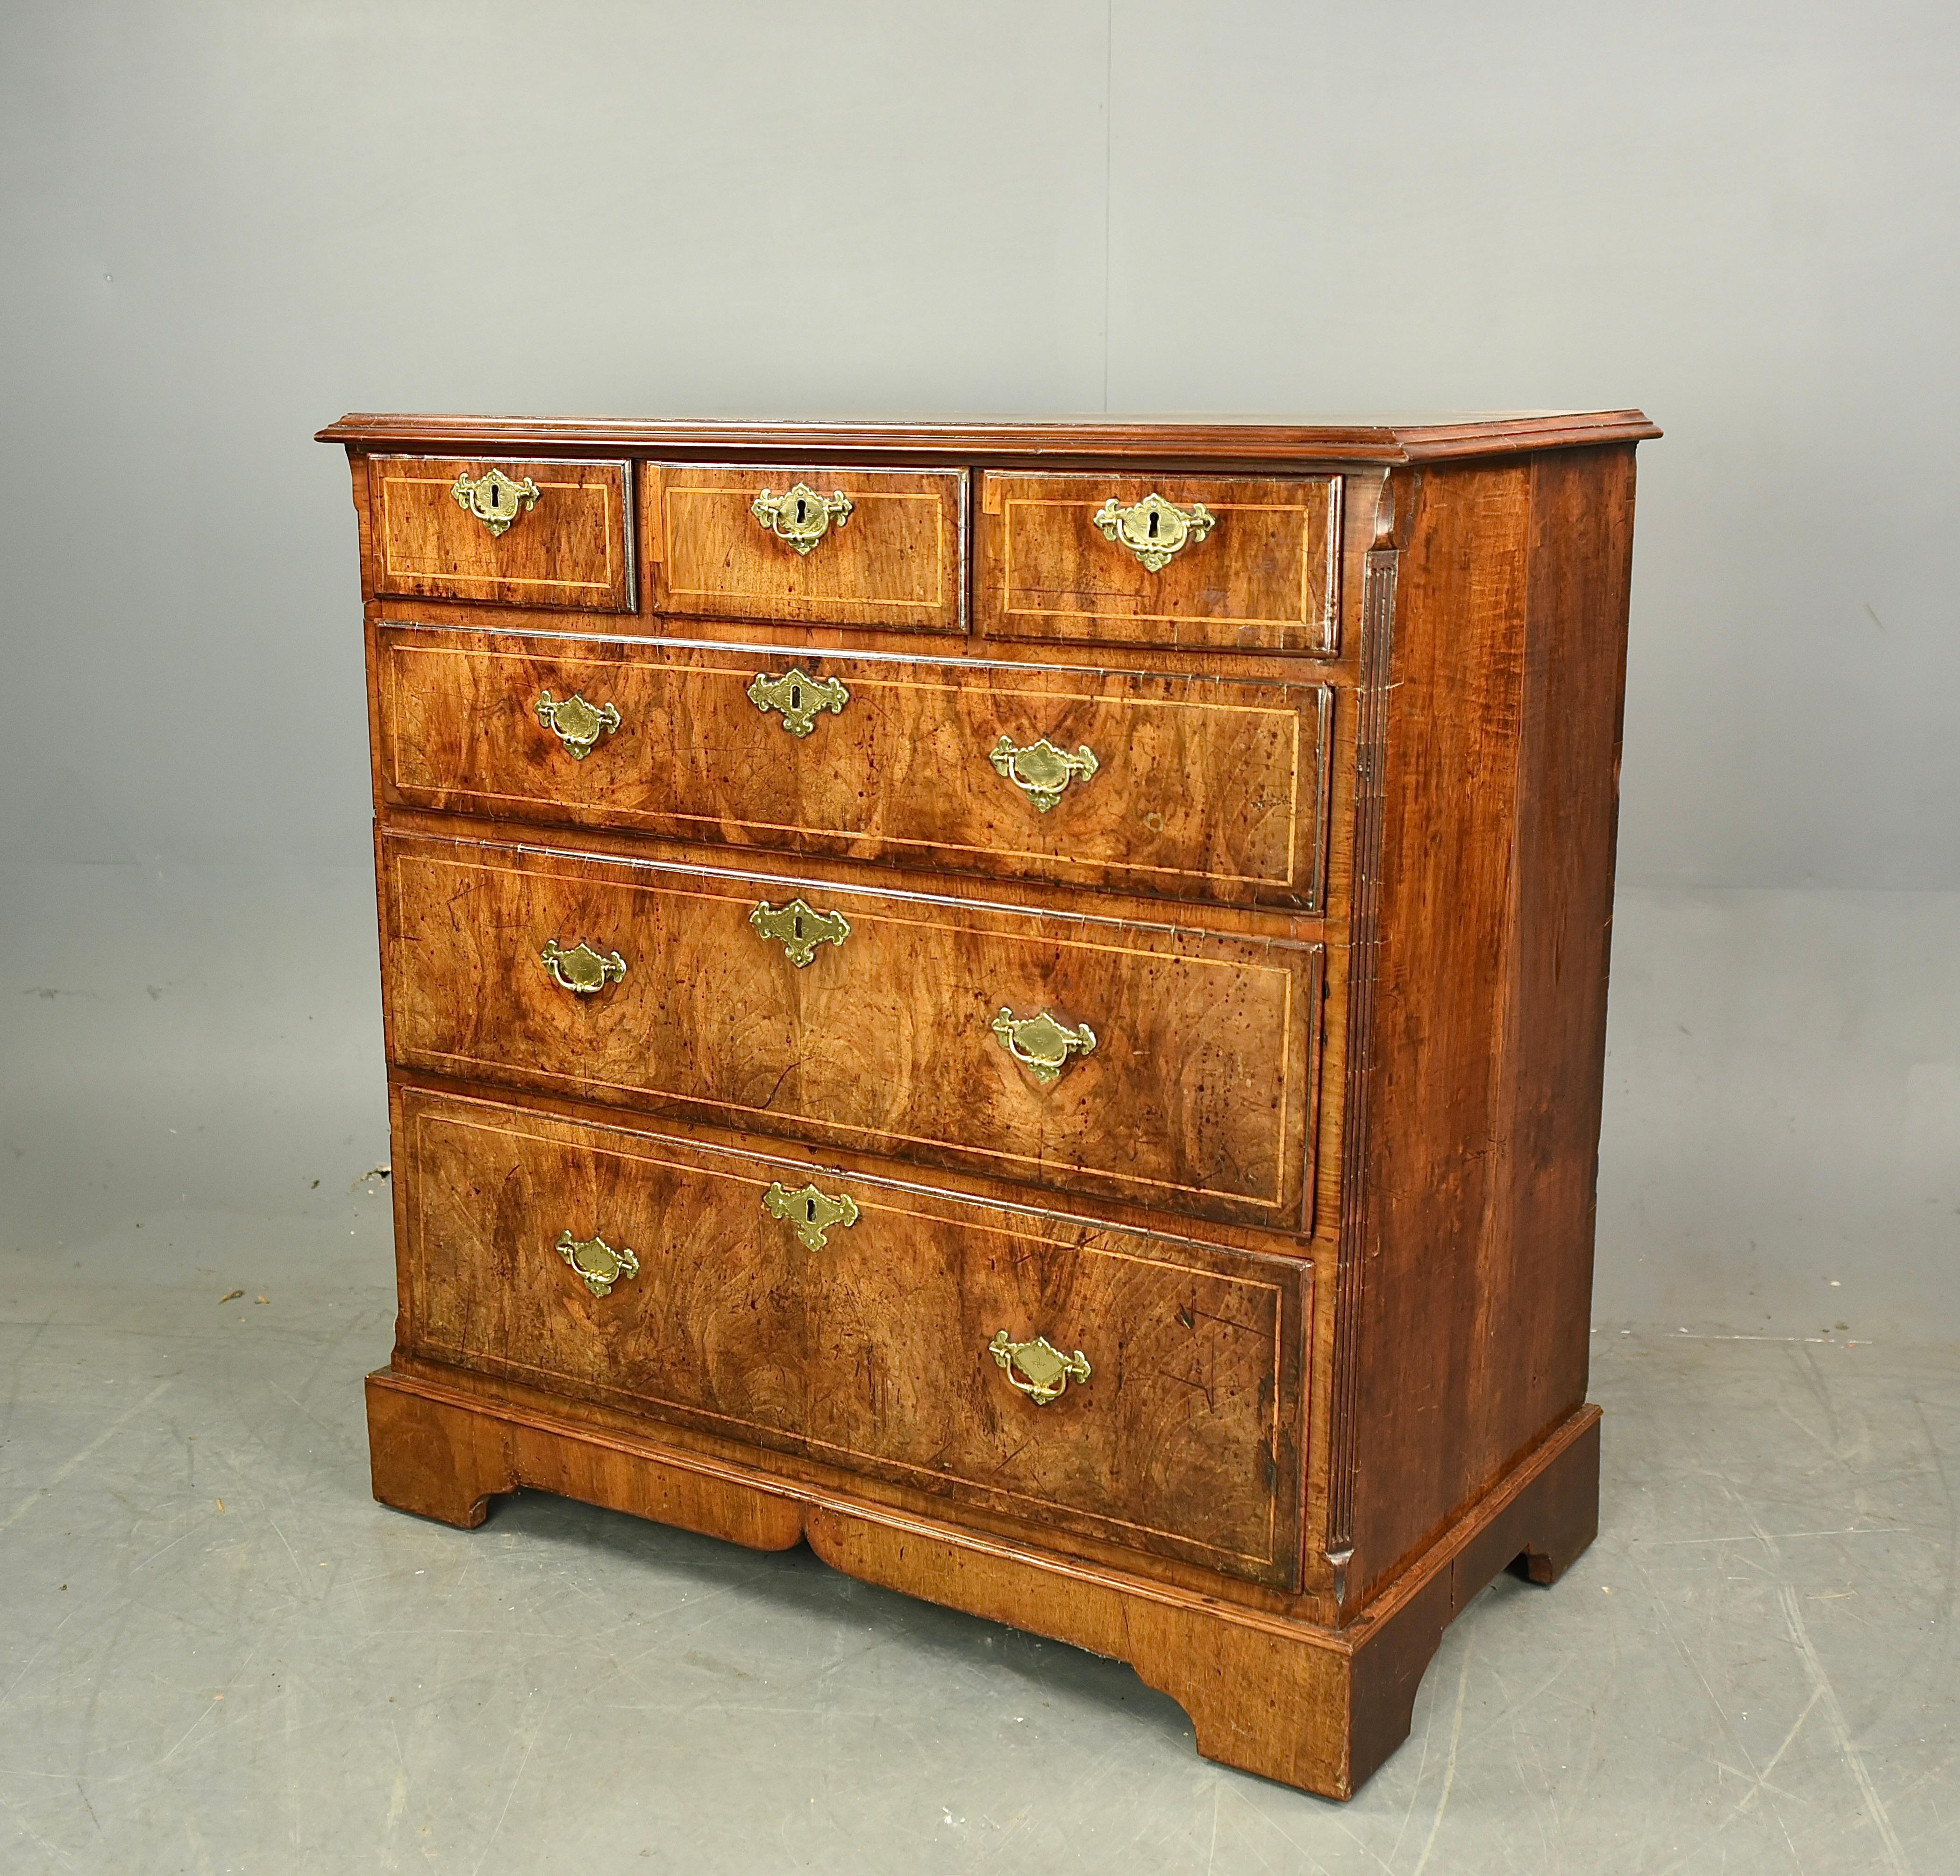 Fine quality early 18th century walnut chest of drawers circa 1730 .
The chest consists of three small drawers over 3 full width drawers that are all oak lined with engraved plate handles , All drawers are solid and slide nice and smooth as they